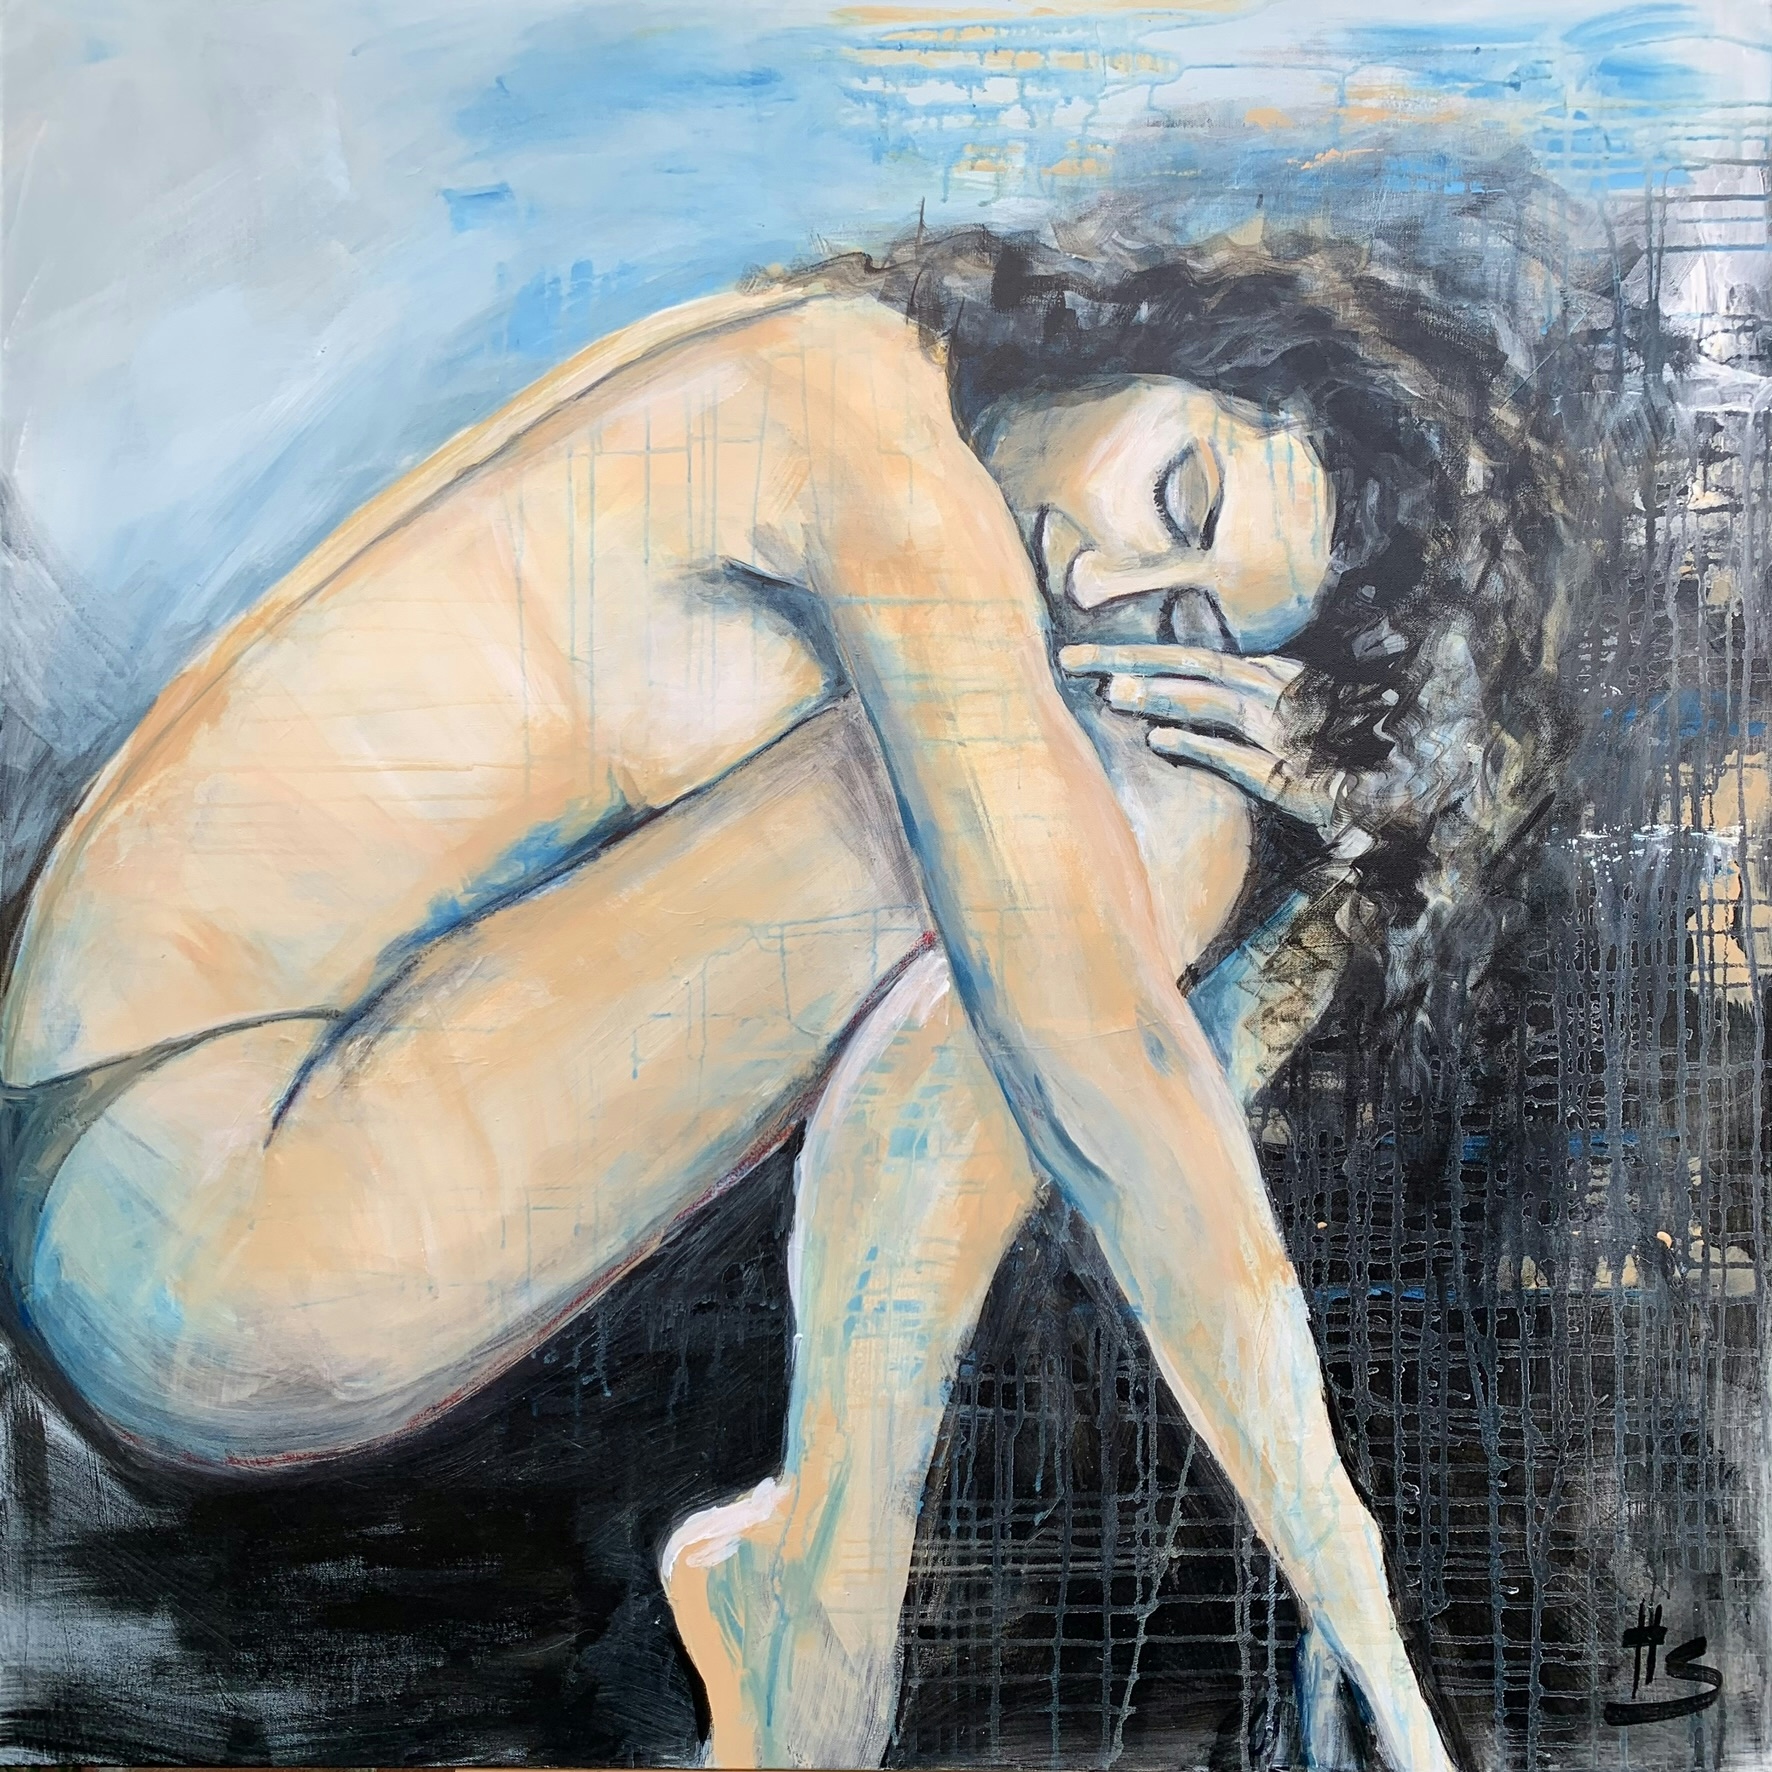 Nude artwork by Heike Schümann depicts a peaceful woman with closed eyes